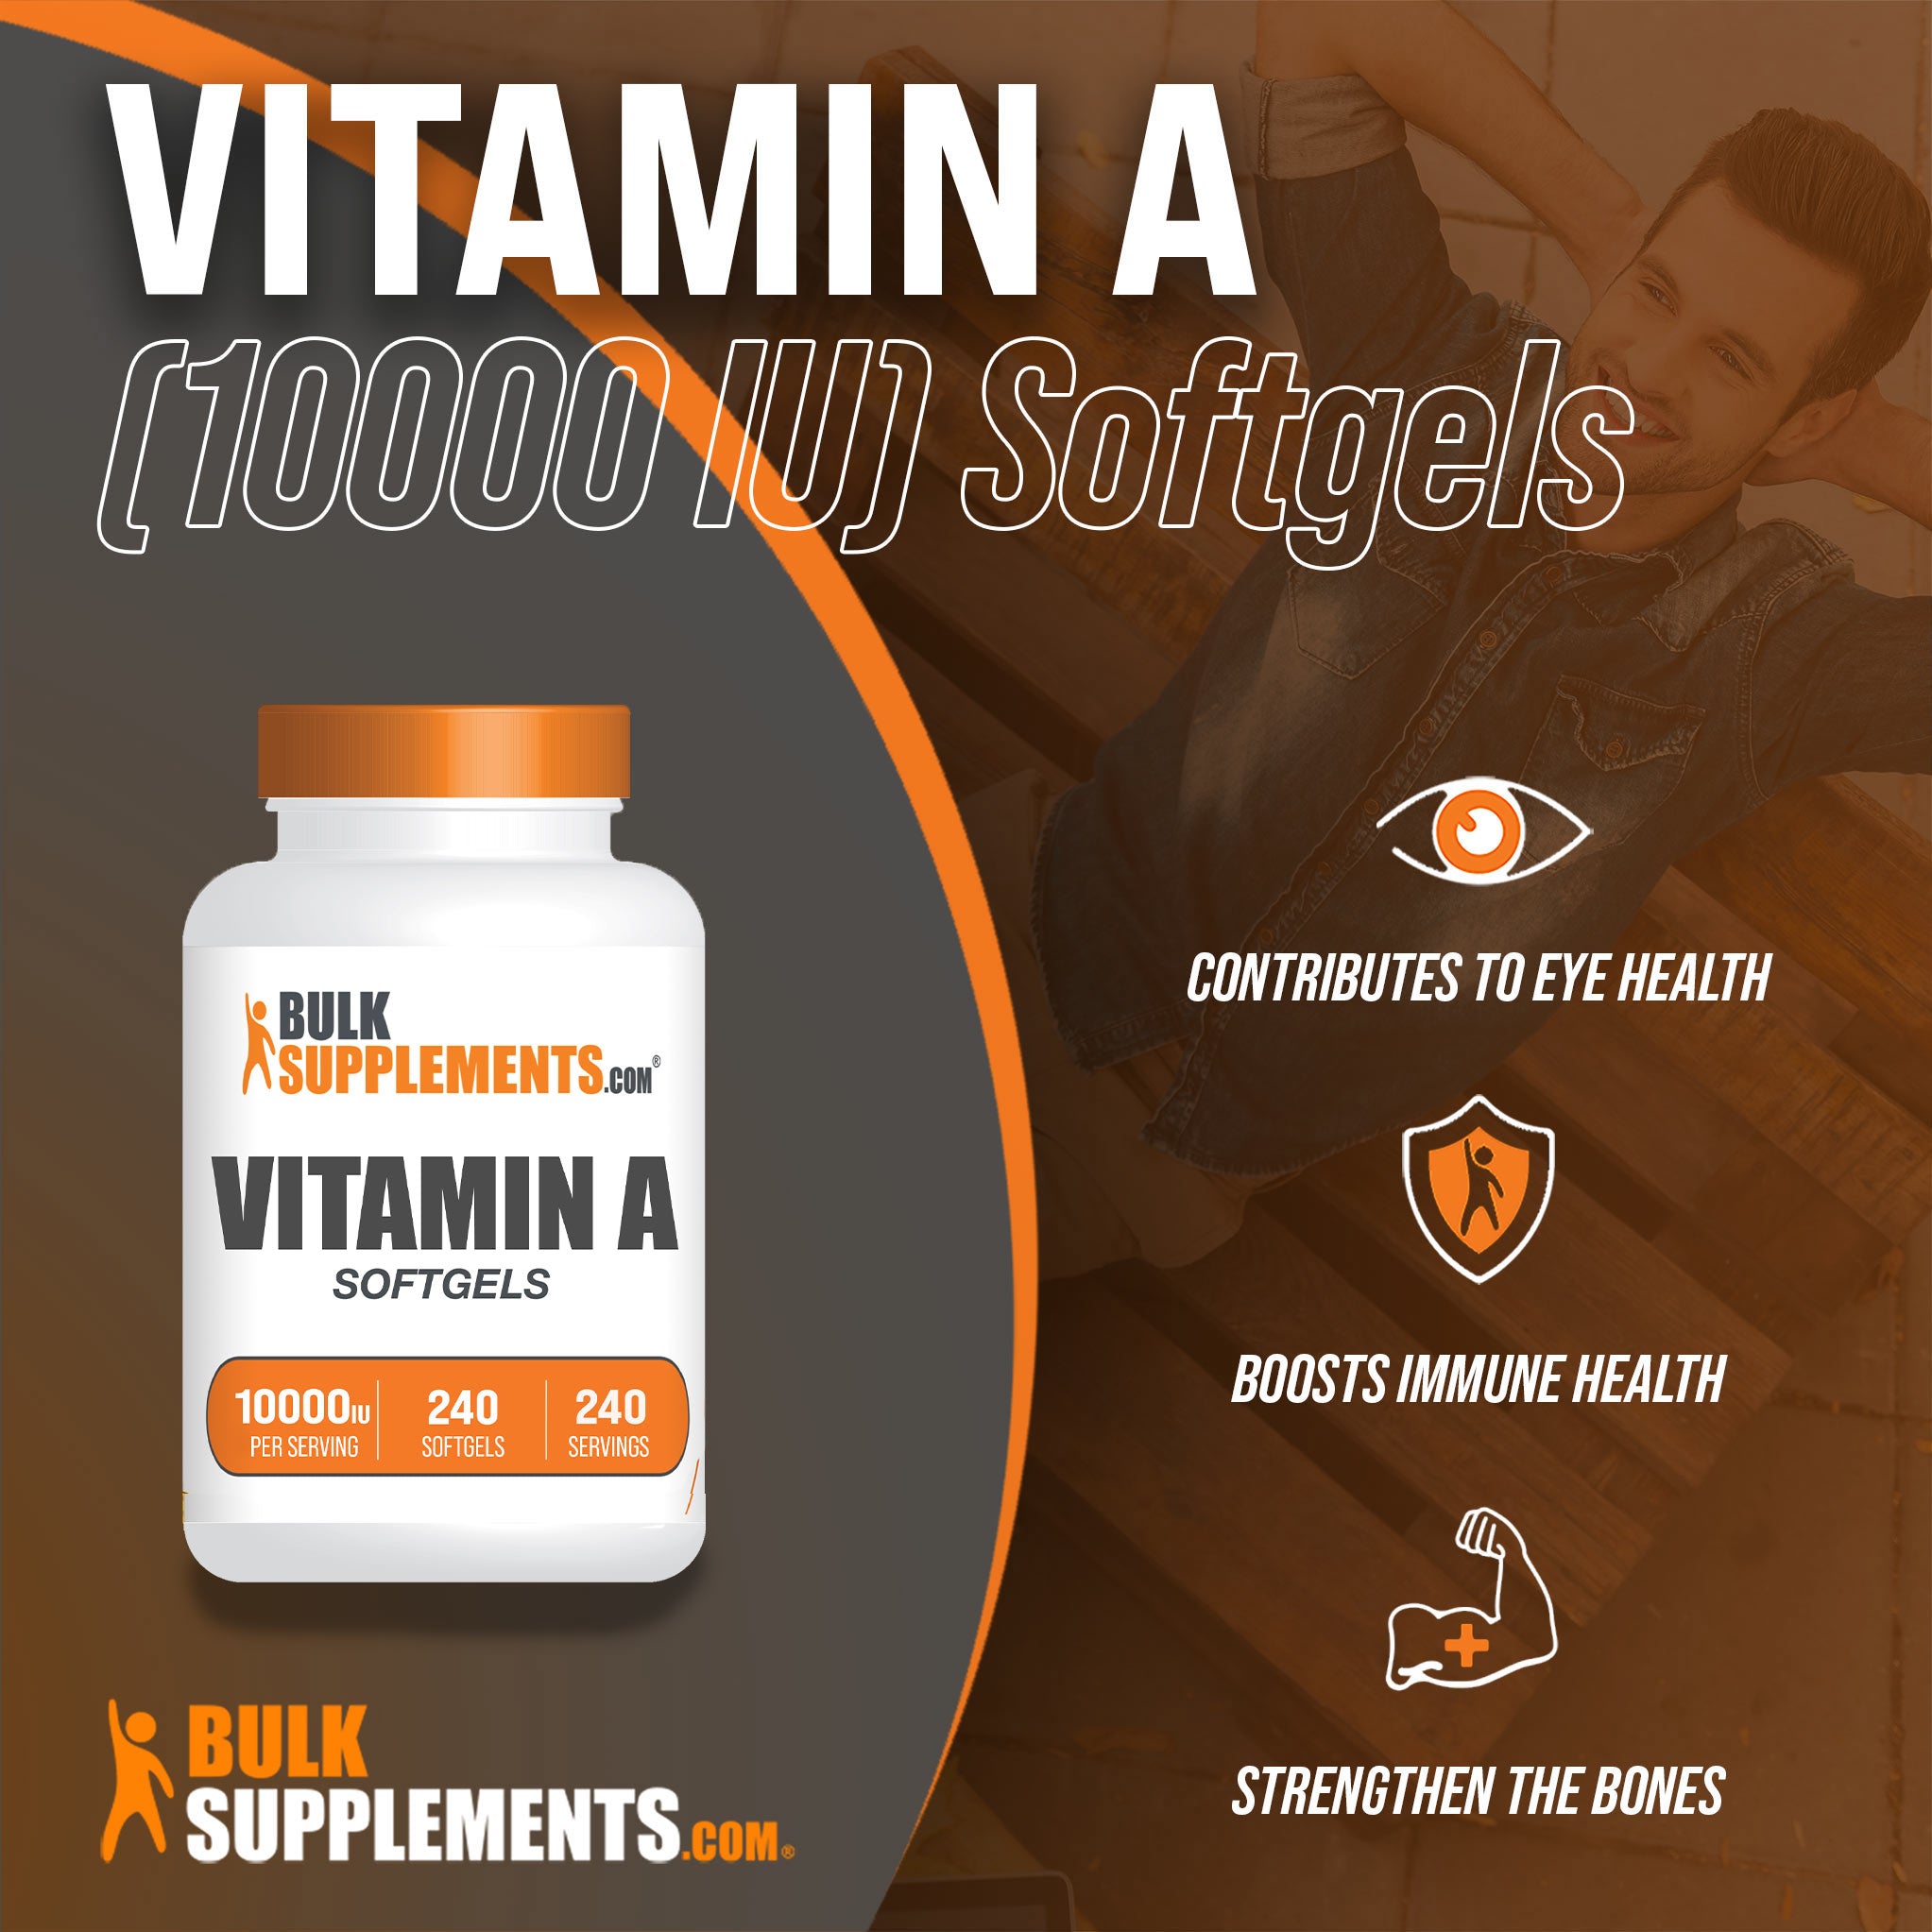 Benefits of Vitamin A Softgels; contributes to eye health, boosts immune health, strengthen the bones